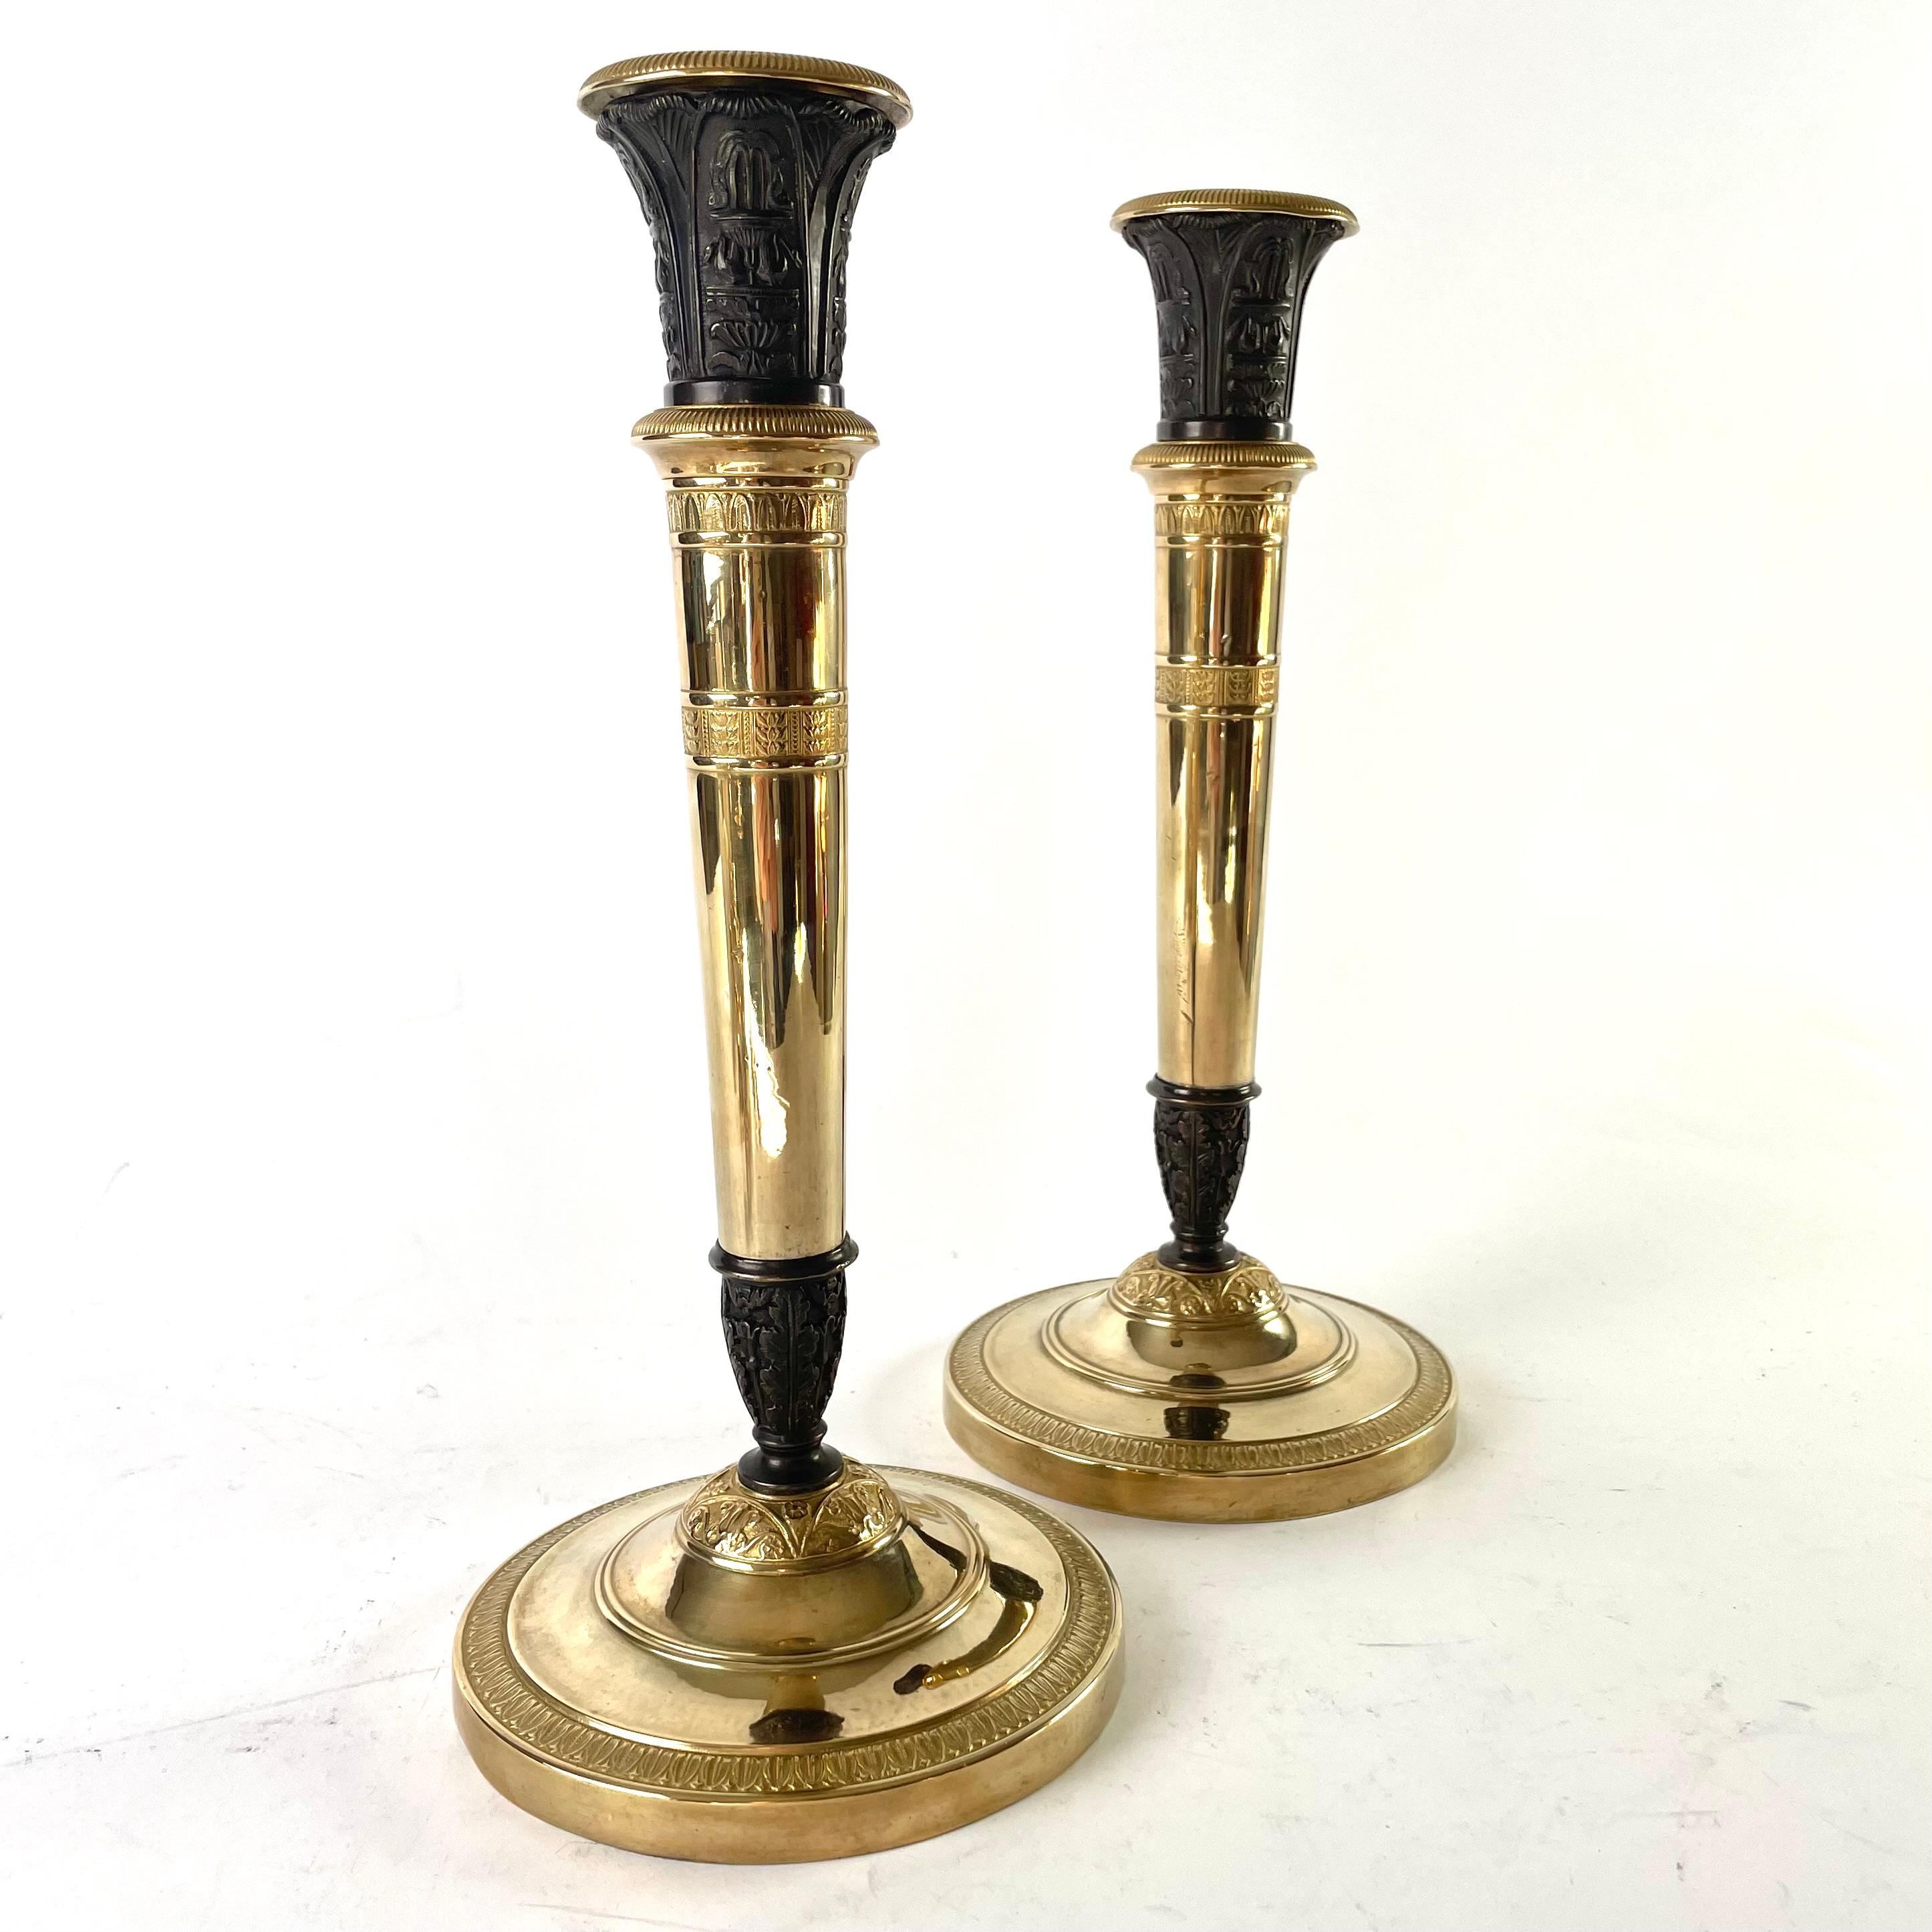 A pair of large and elegant Empire Candlesticks, convertible into Candelabra, made in France during the 1820s. Gilded and dark patinated bronze. Can be used as large candlesticks or as three-armed candelabra. The height with the candelabra arms is